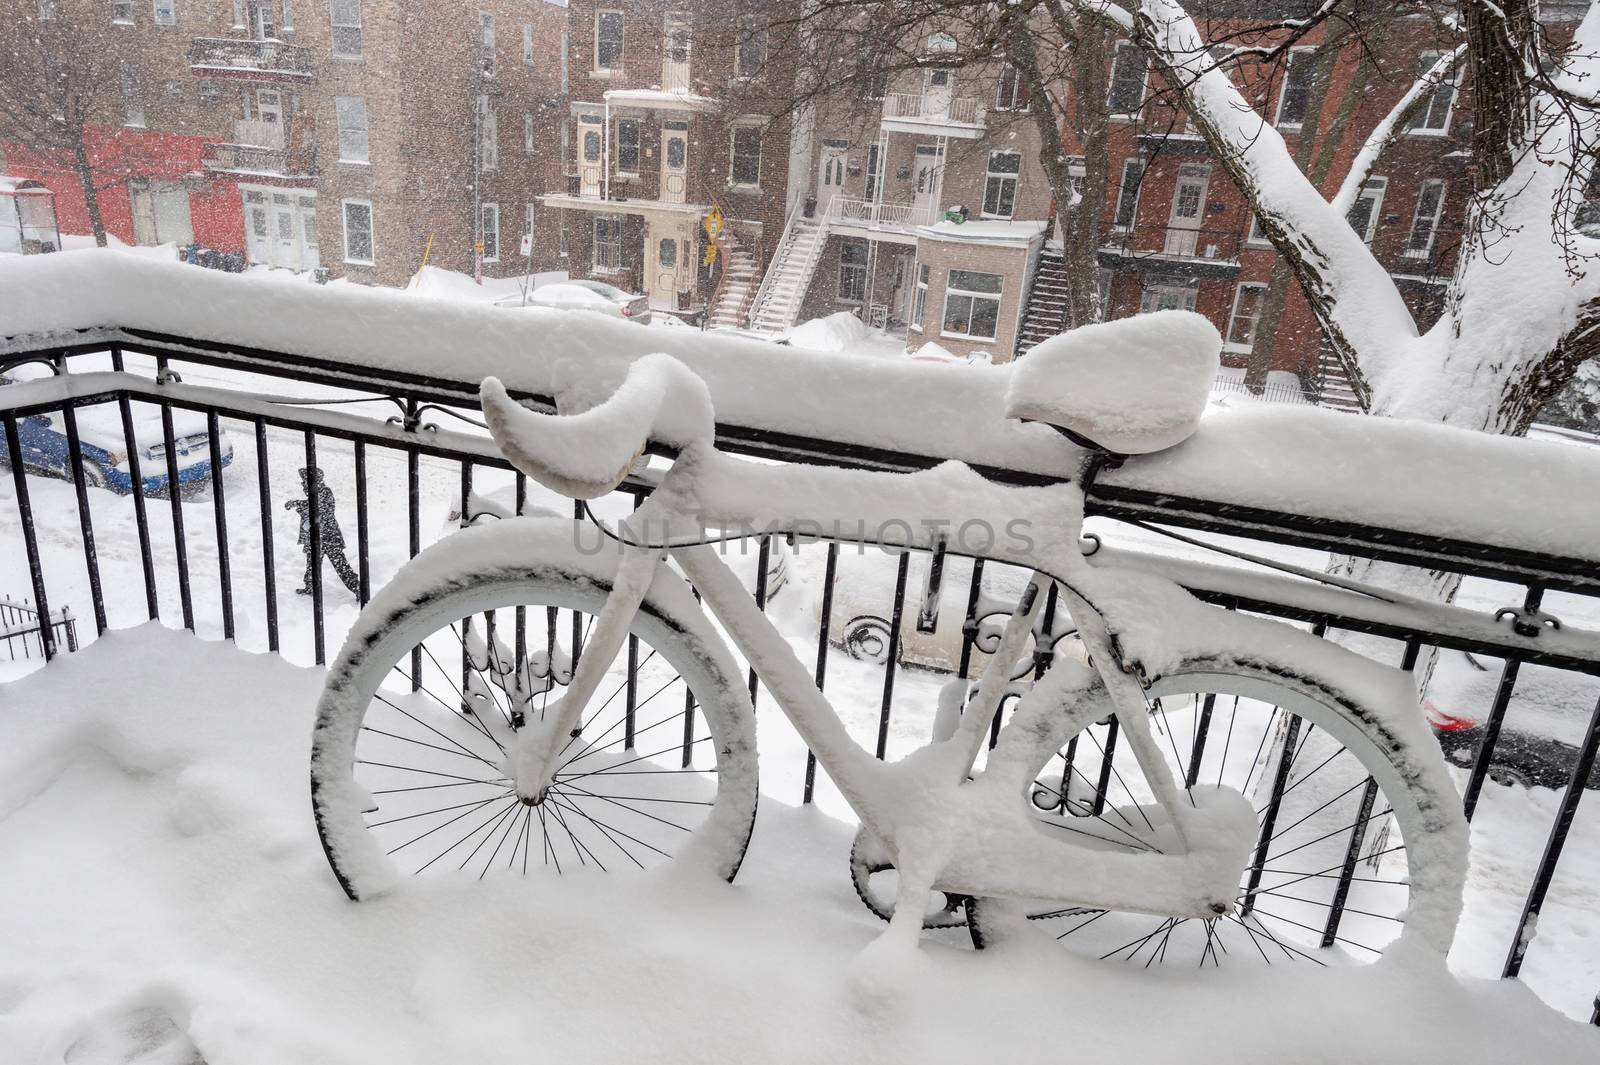 Bike covered with fresh snow in Montreal, Canada (January 2019)